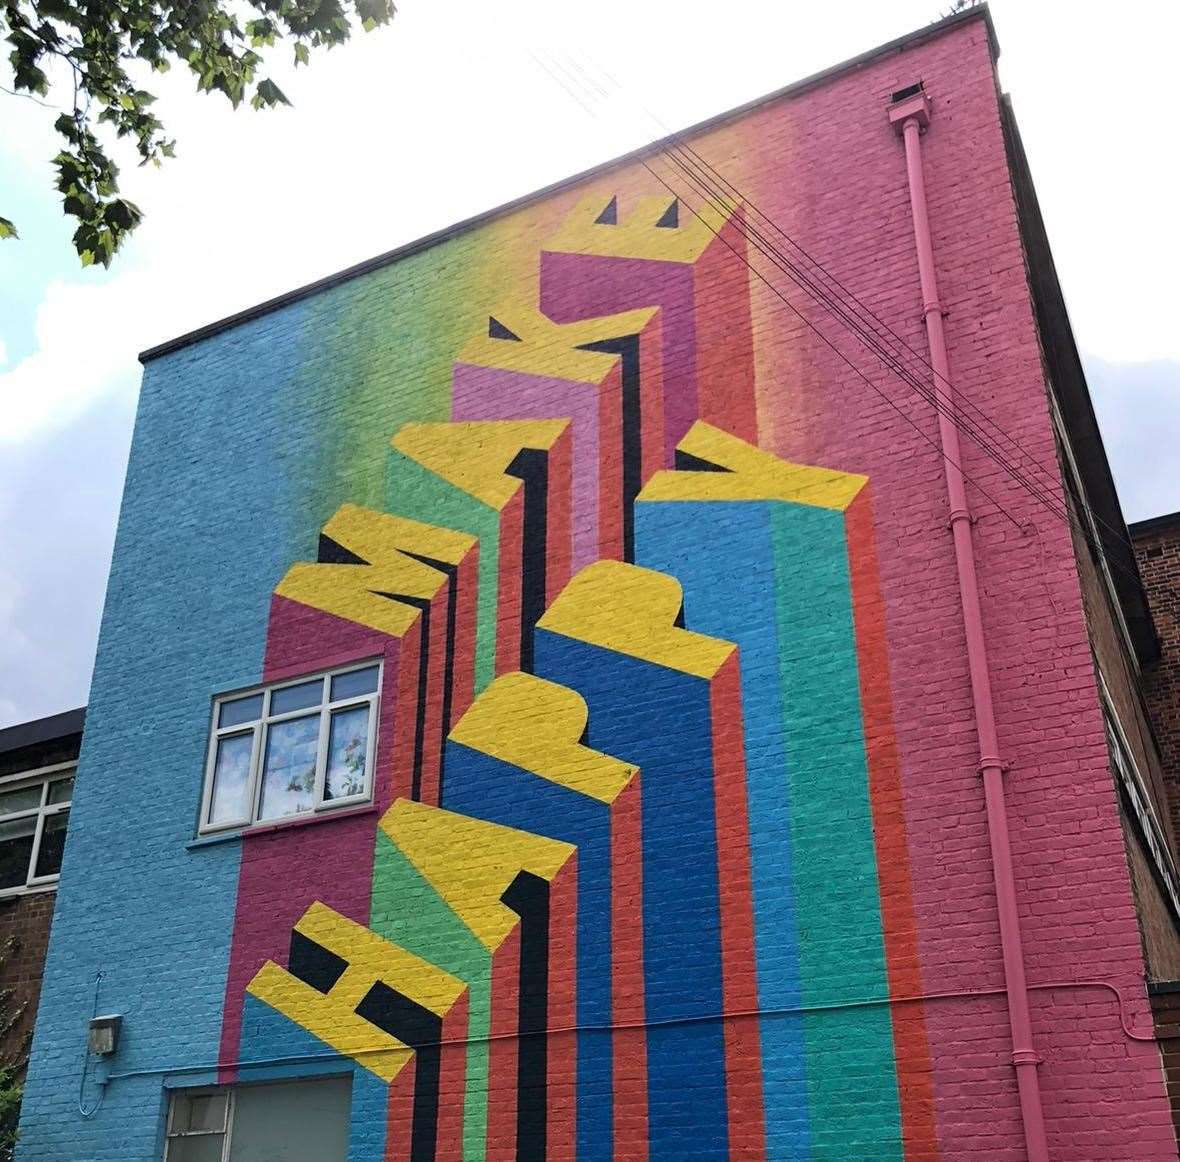 Artwork by Morag Myerscough has been turned into a happy scrubs mural